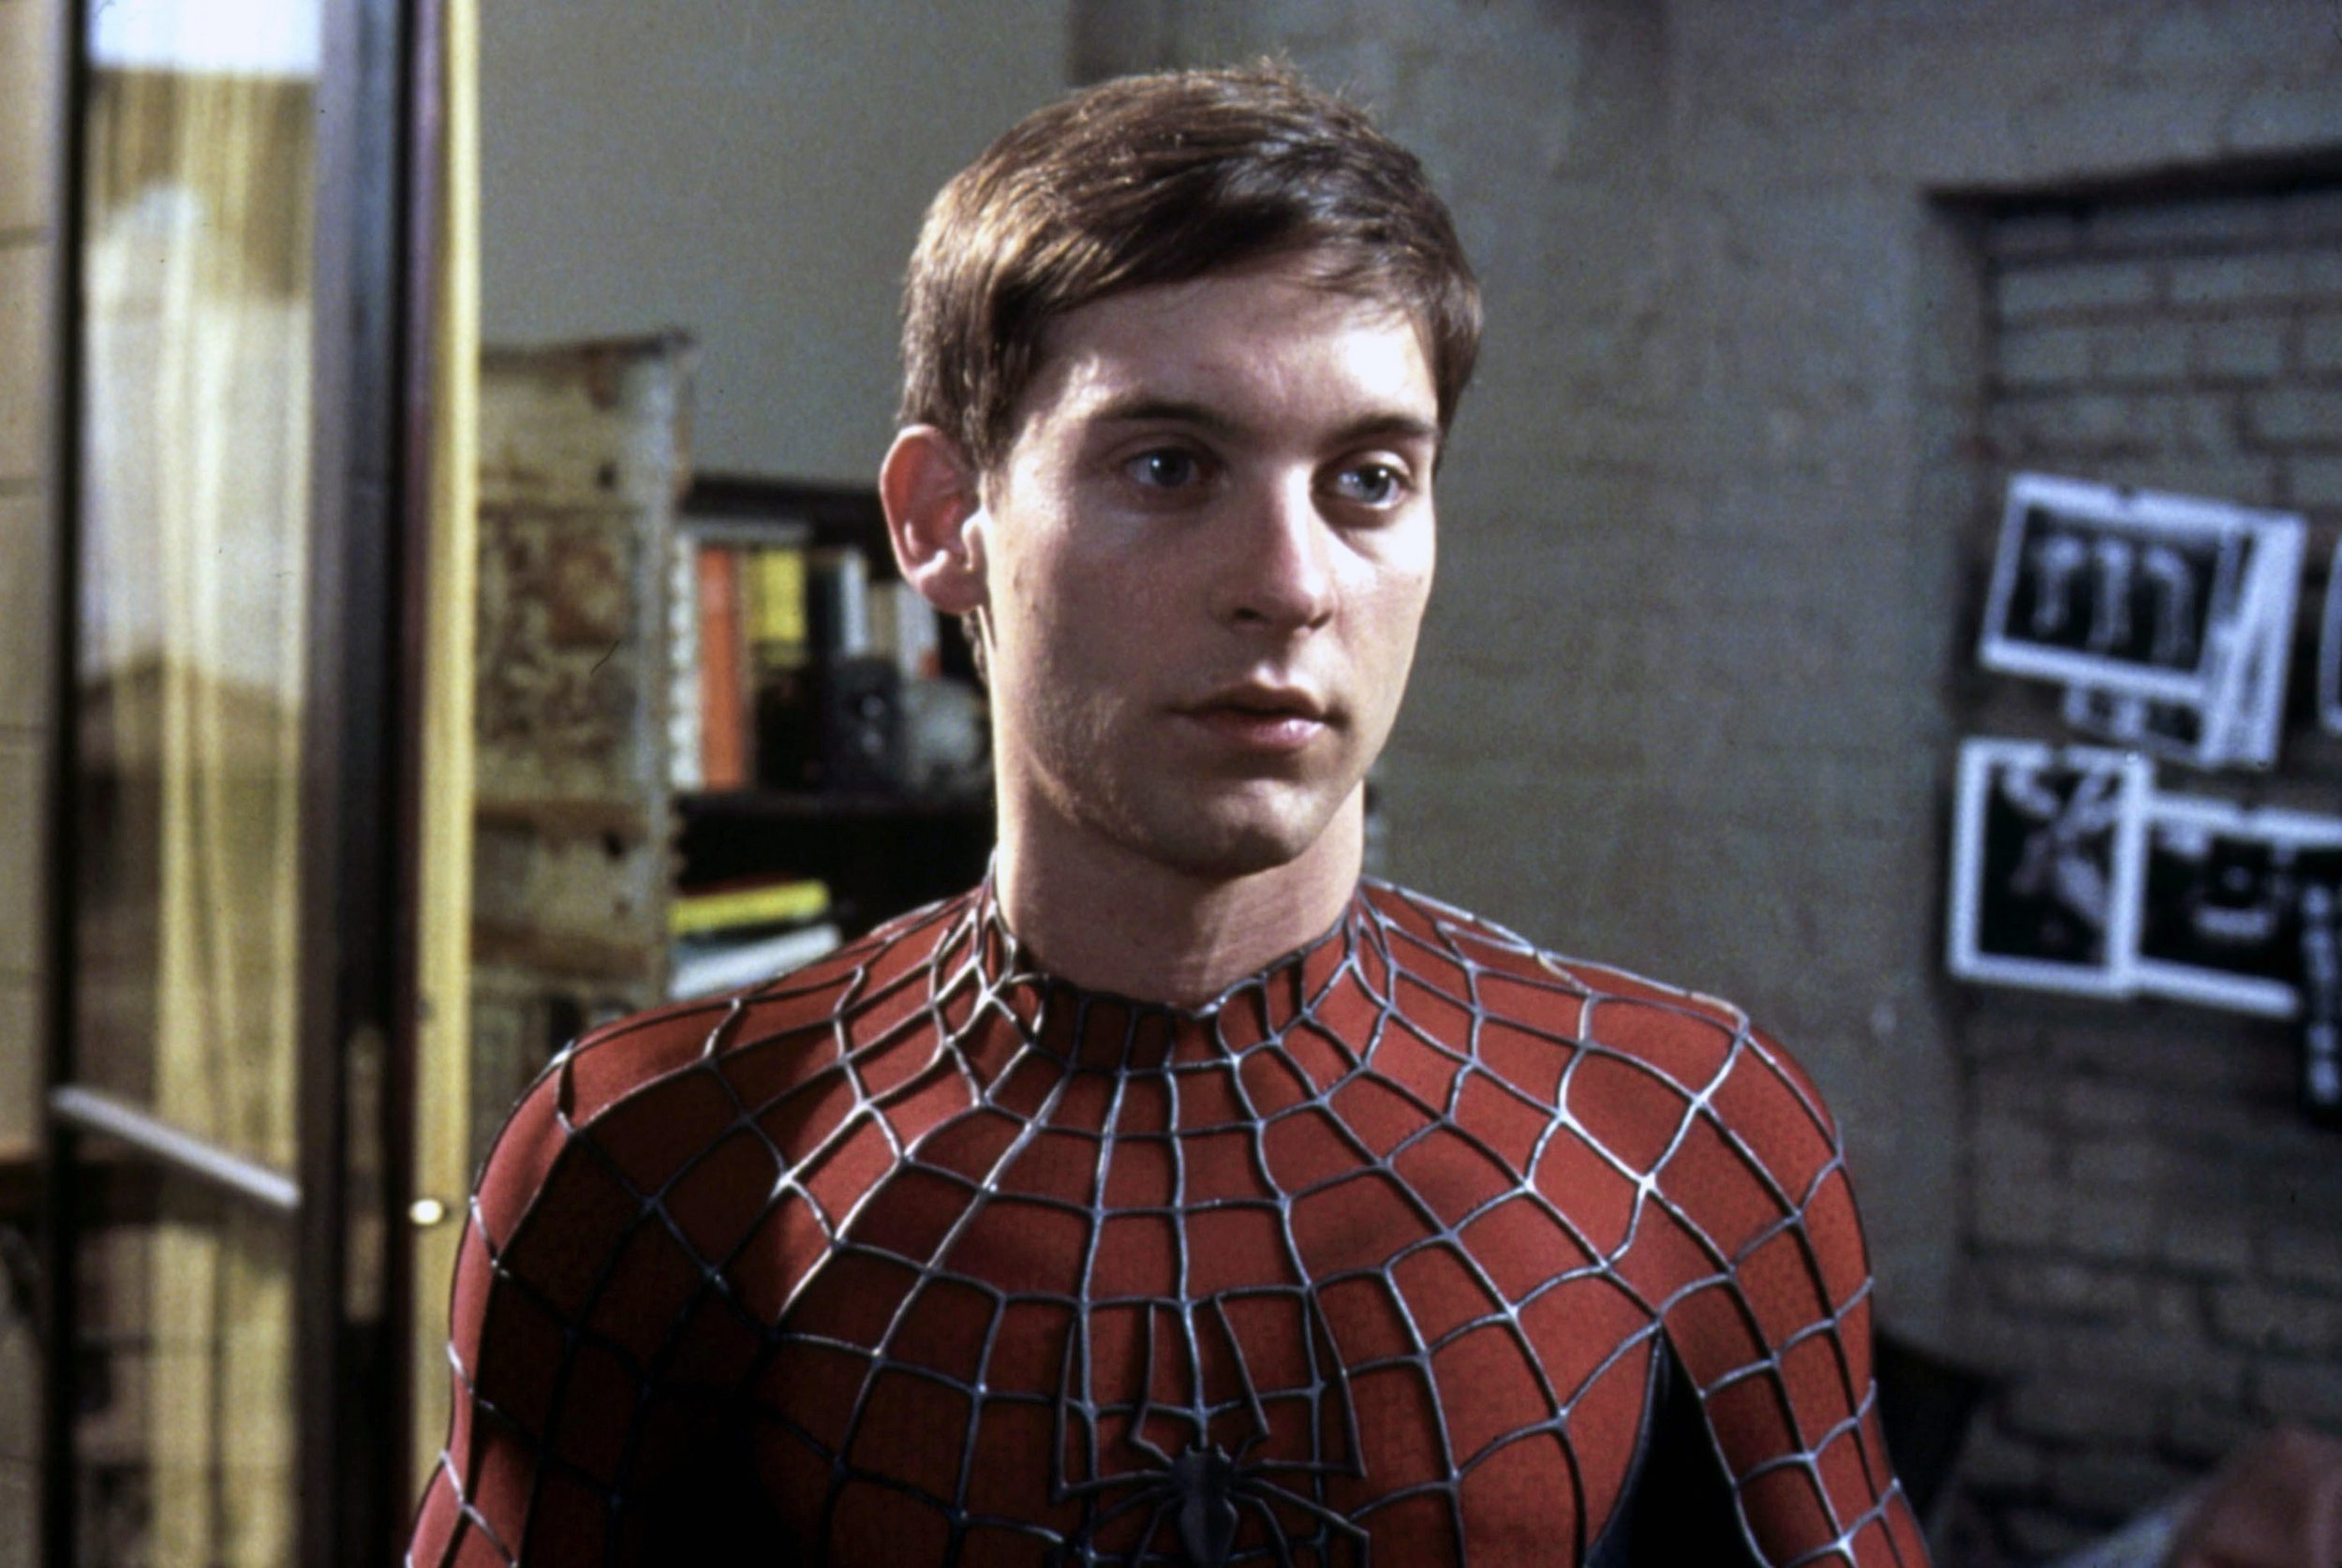 Marvel Angry At Tobey Maguire, May Impact His Spider-Man Return